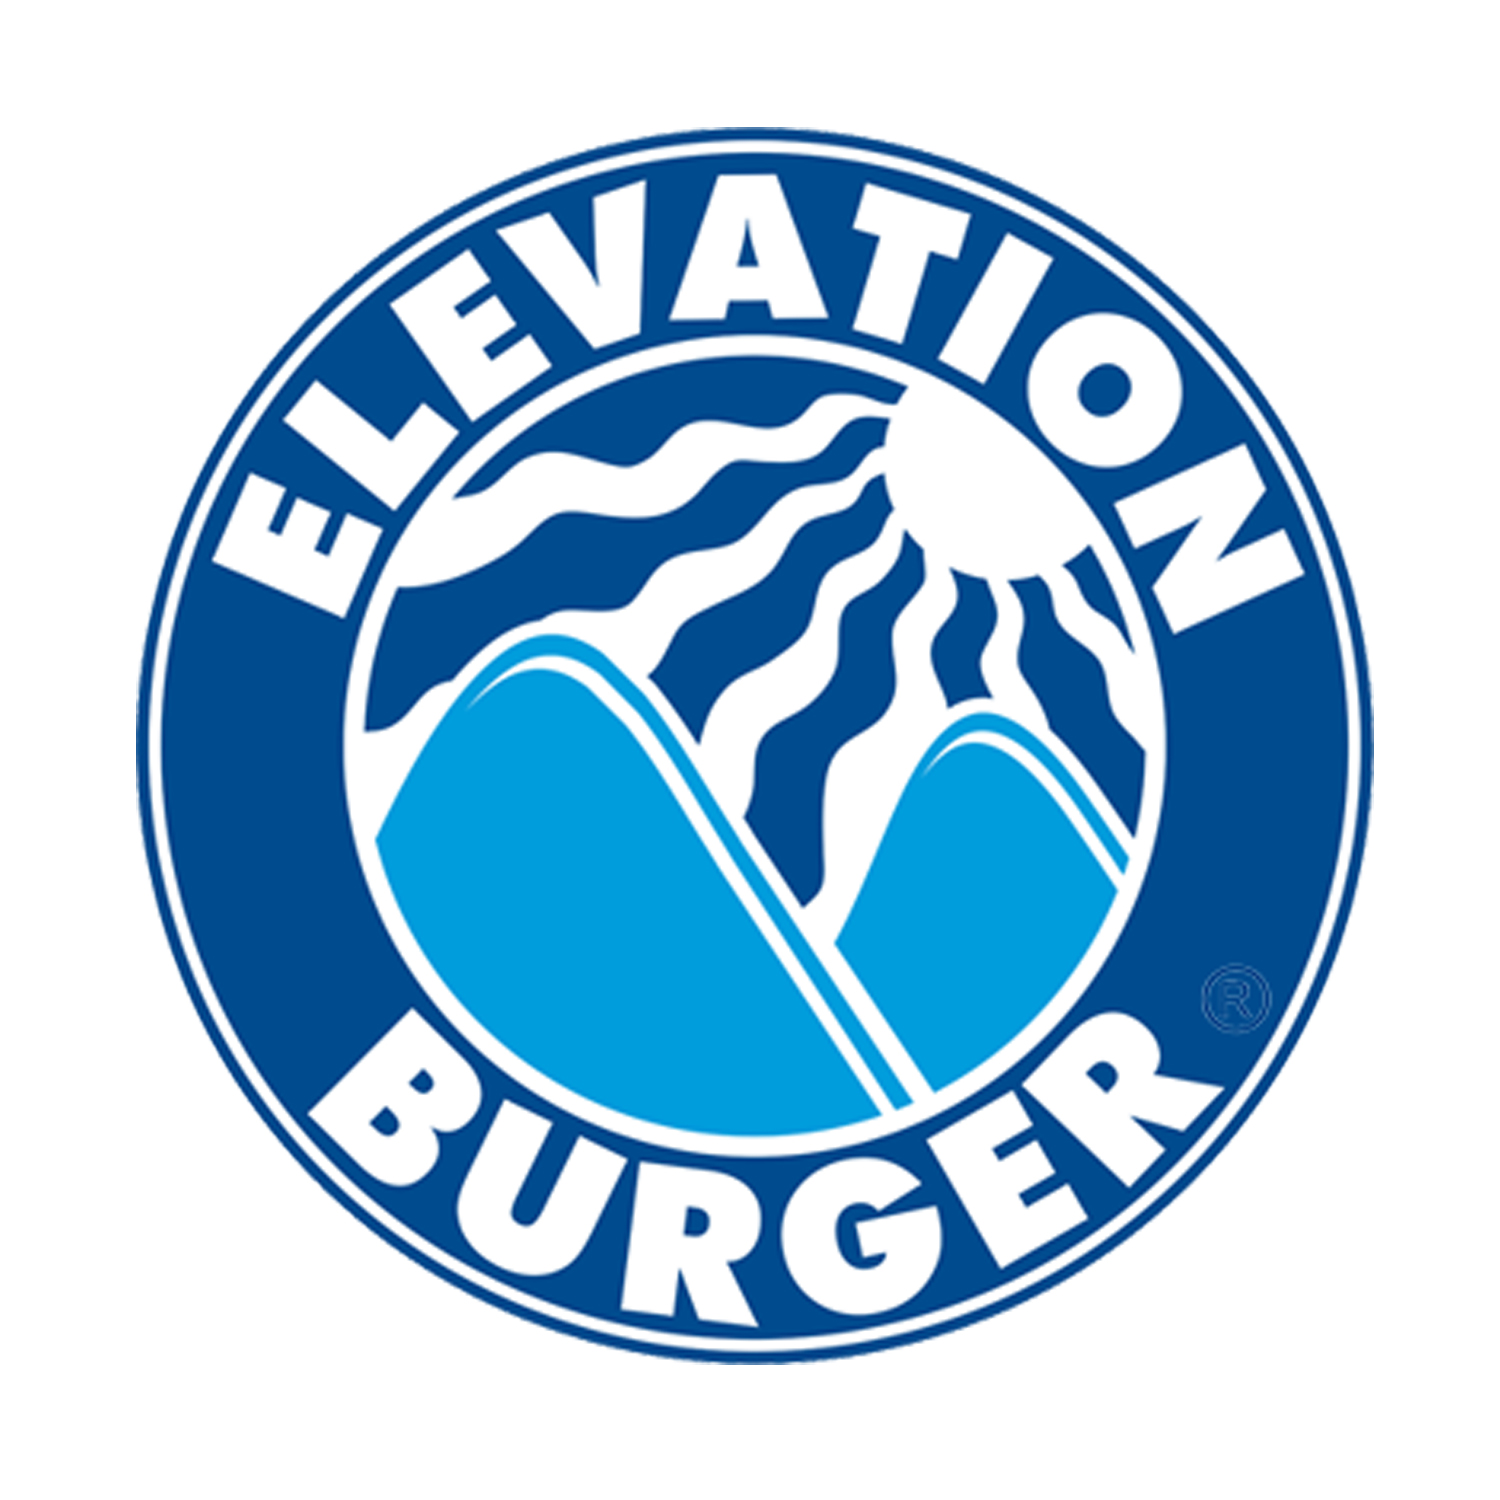 Elevation Burger off Kirby